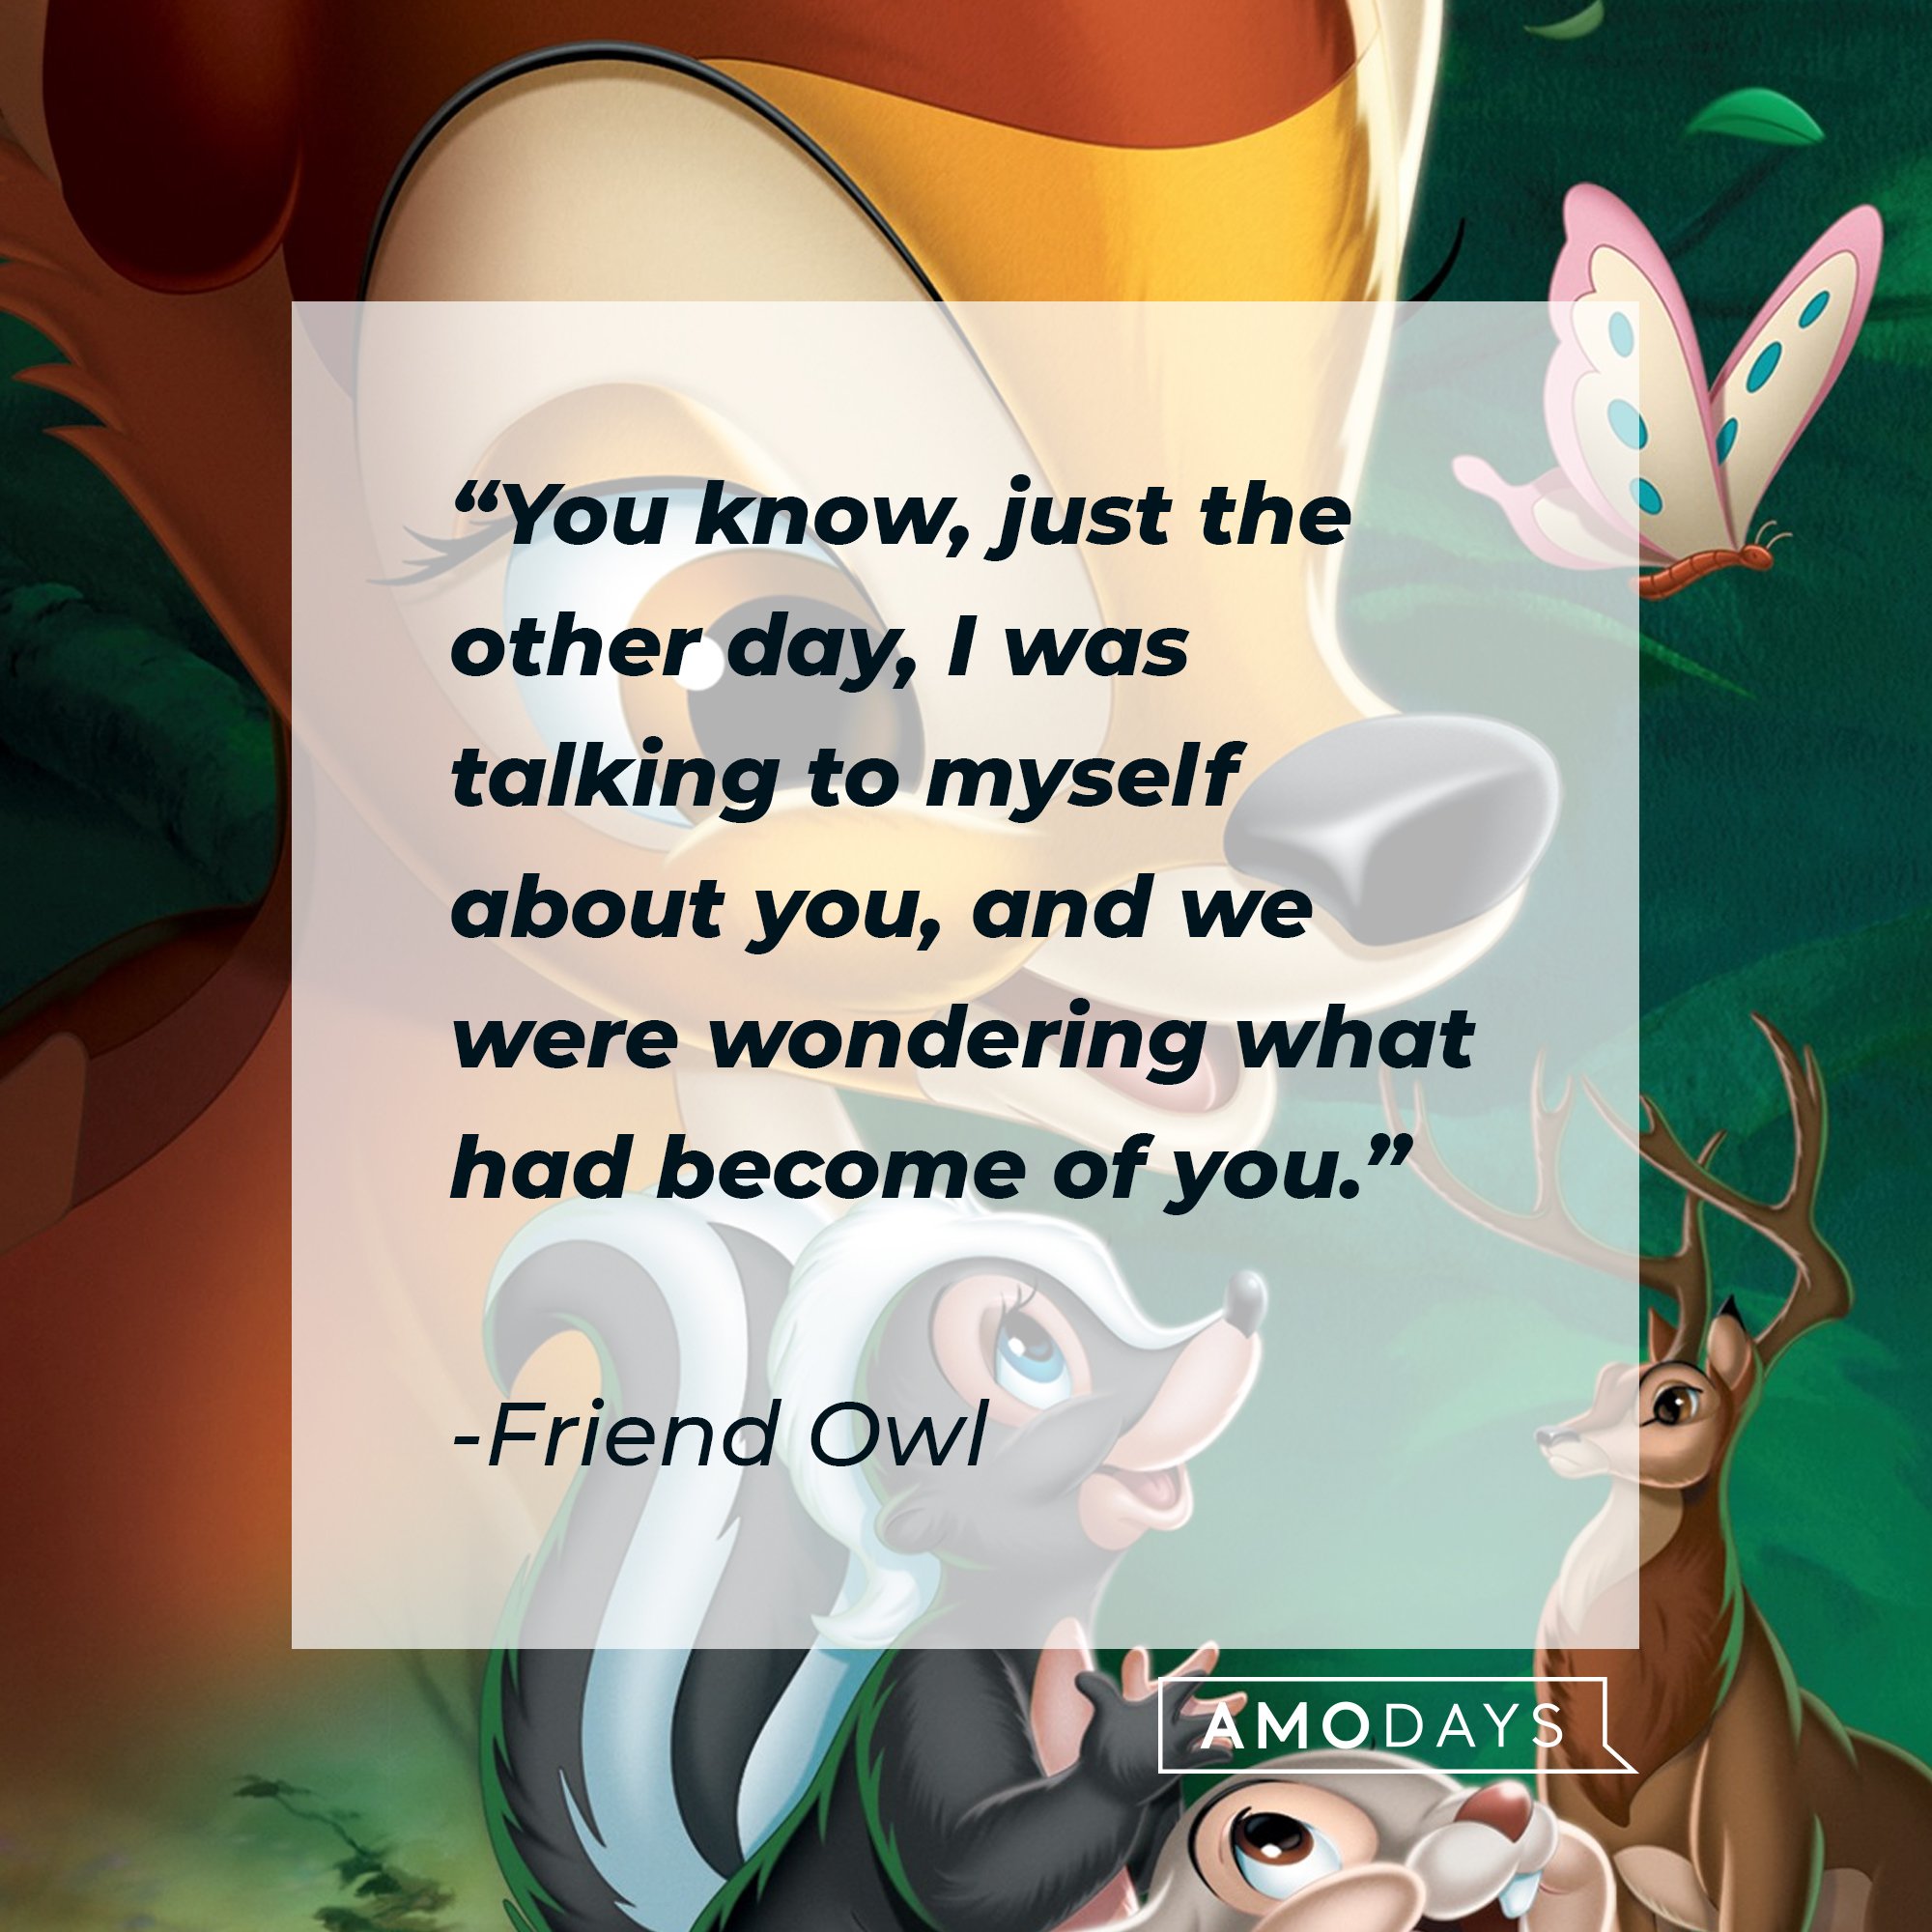 Friend Owl's quote "You know, just the other day, I was talking to myself about you, and we were wondering what had become of you." | Source: facebook.com/DisneyBambi